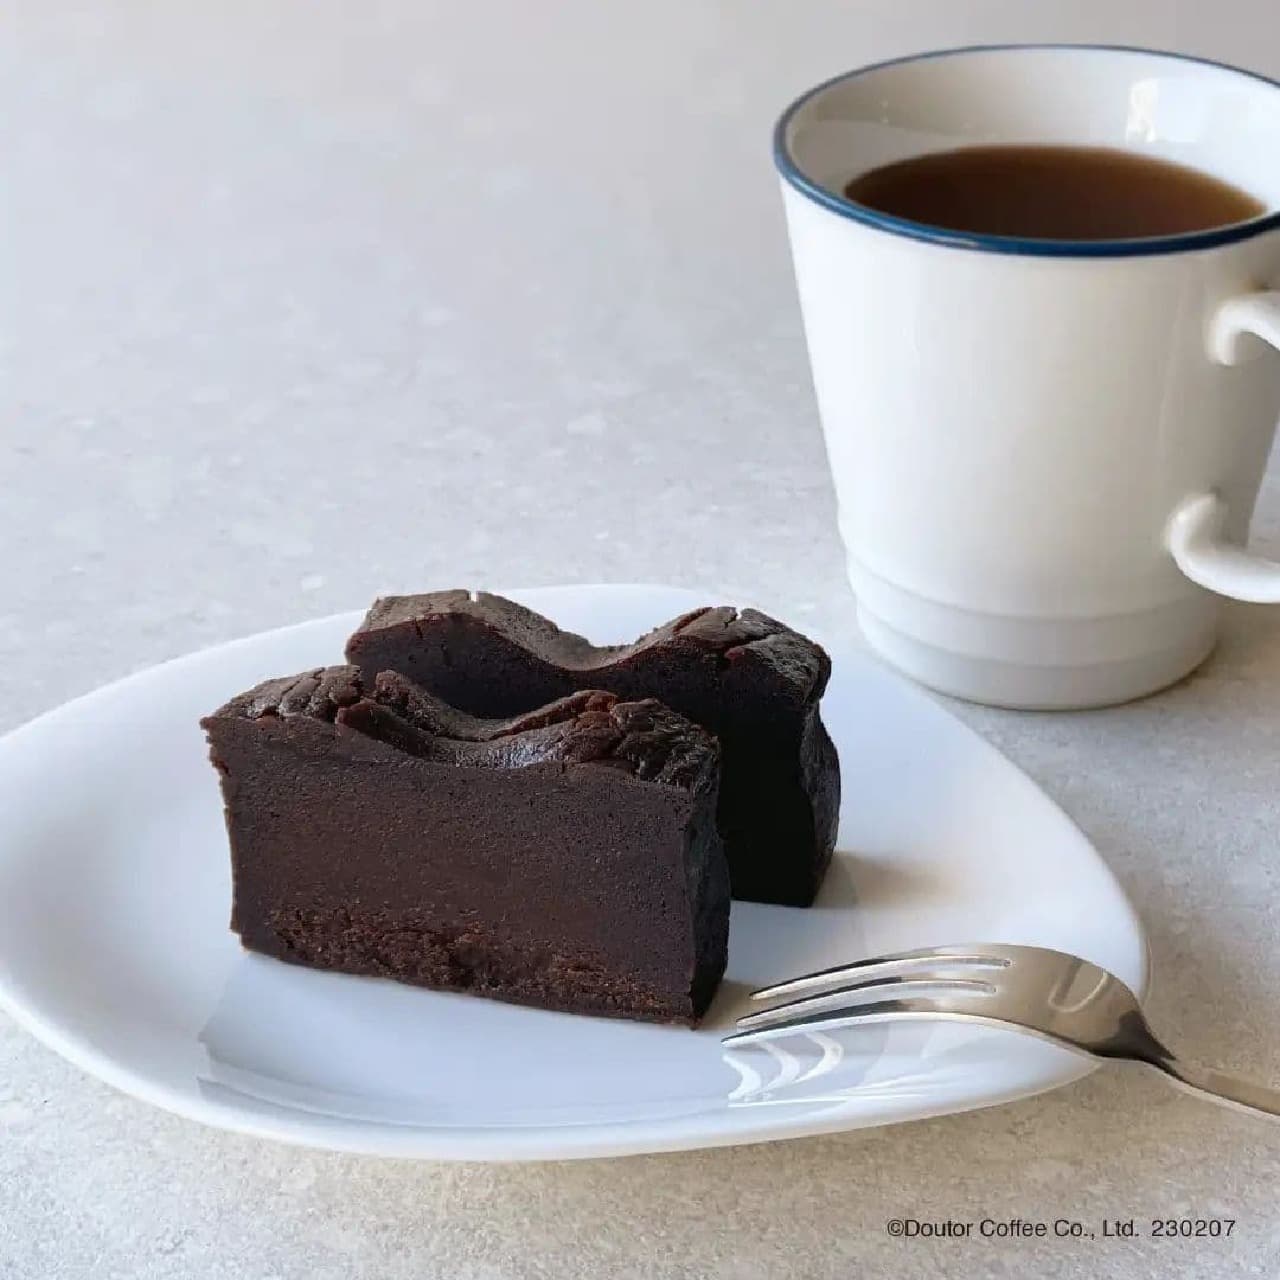 Doutor Online Shop "Chocolatelaine to go with Mild Blend